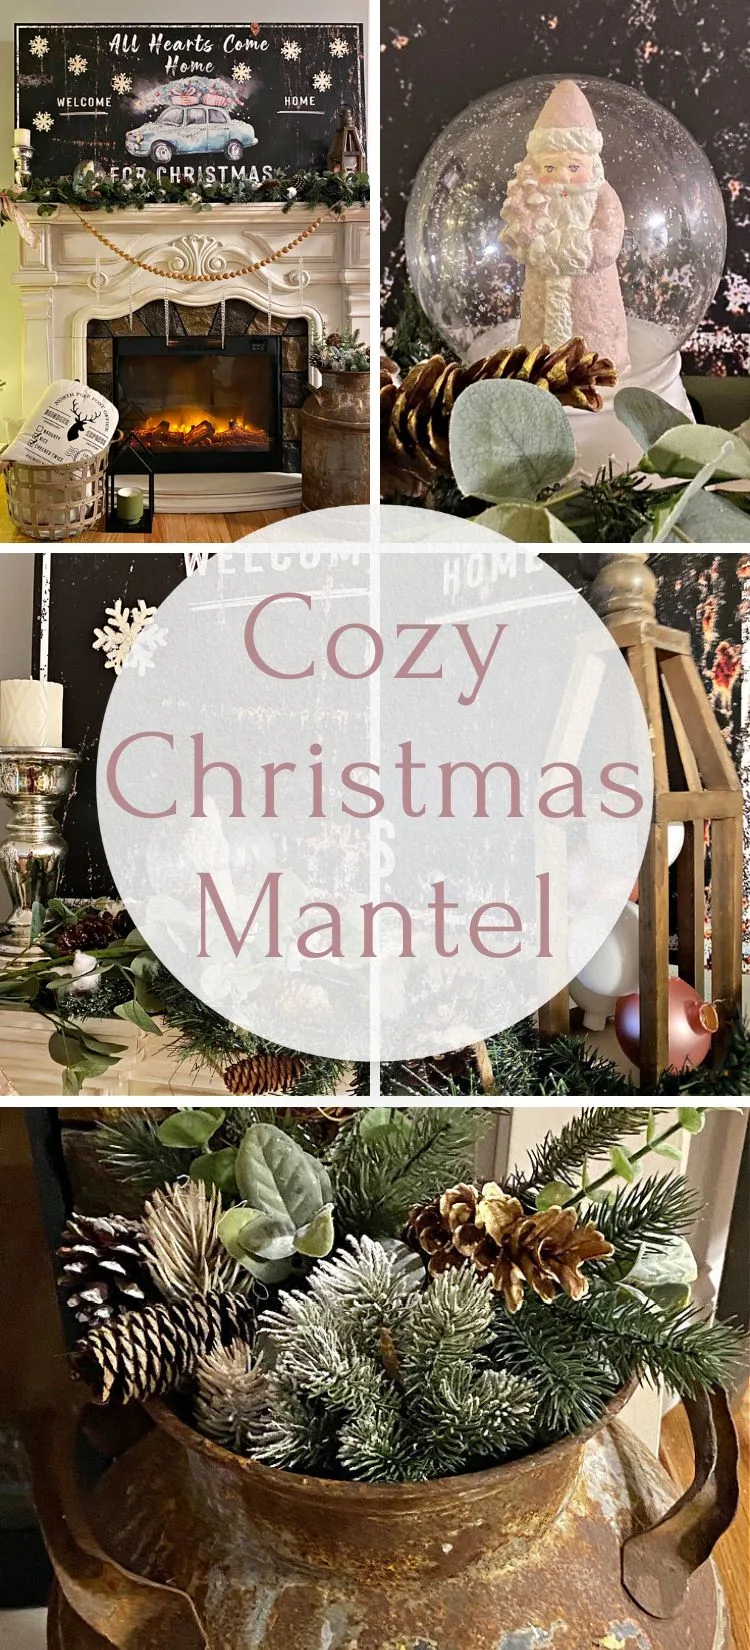 Cozy Christmas Mantel in Blush Pink and Gold pin collage with text overlay